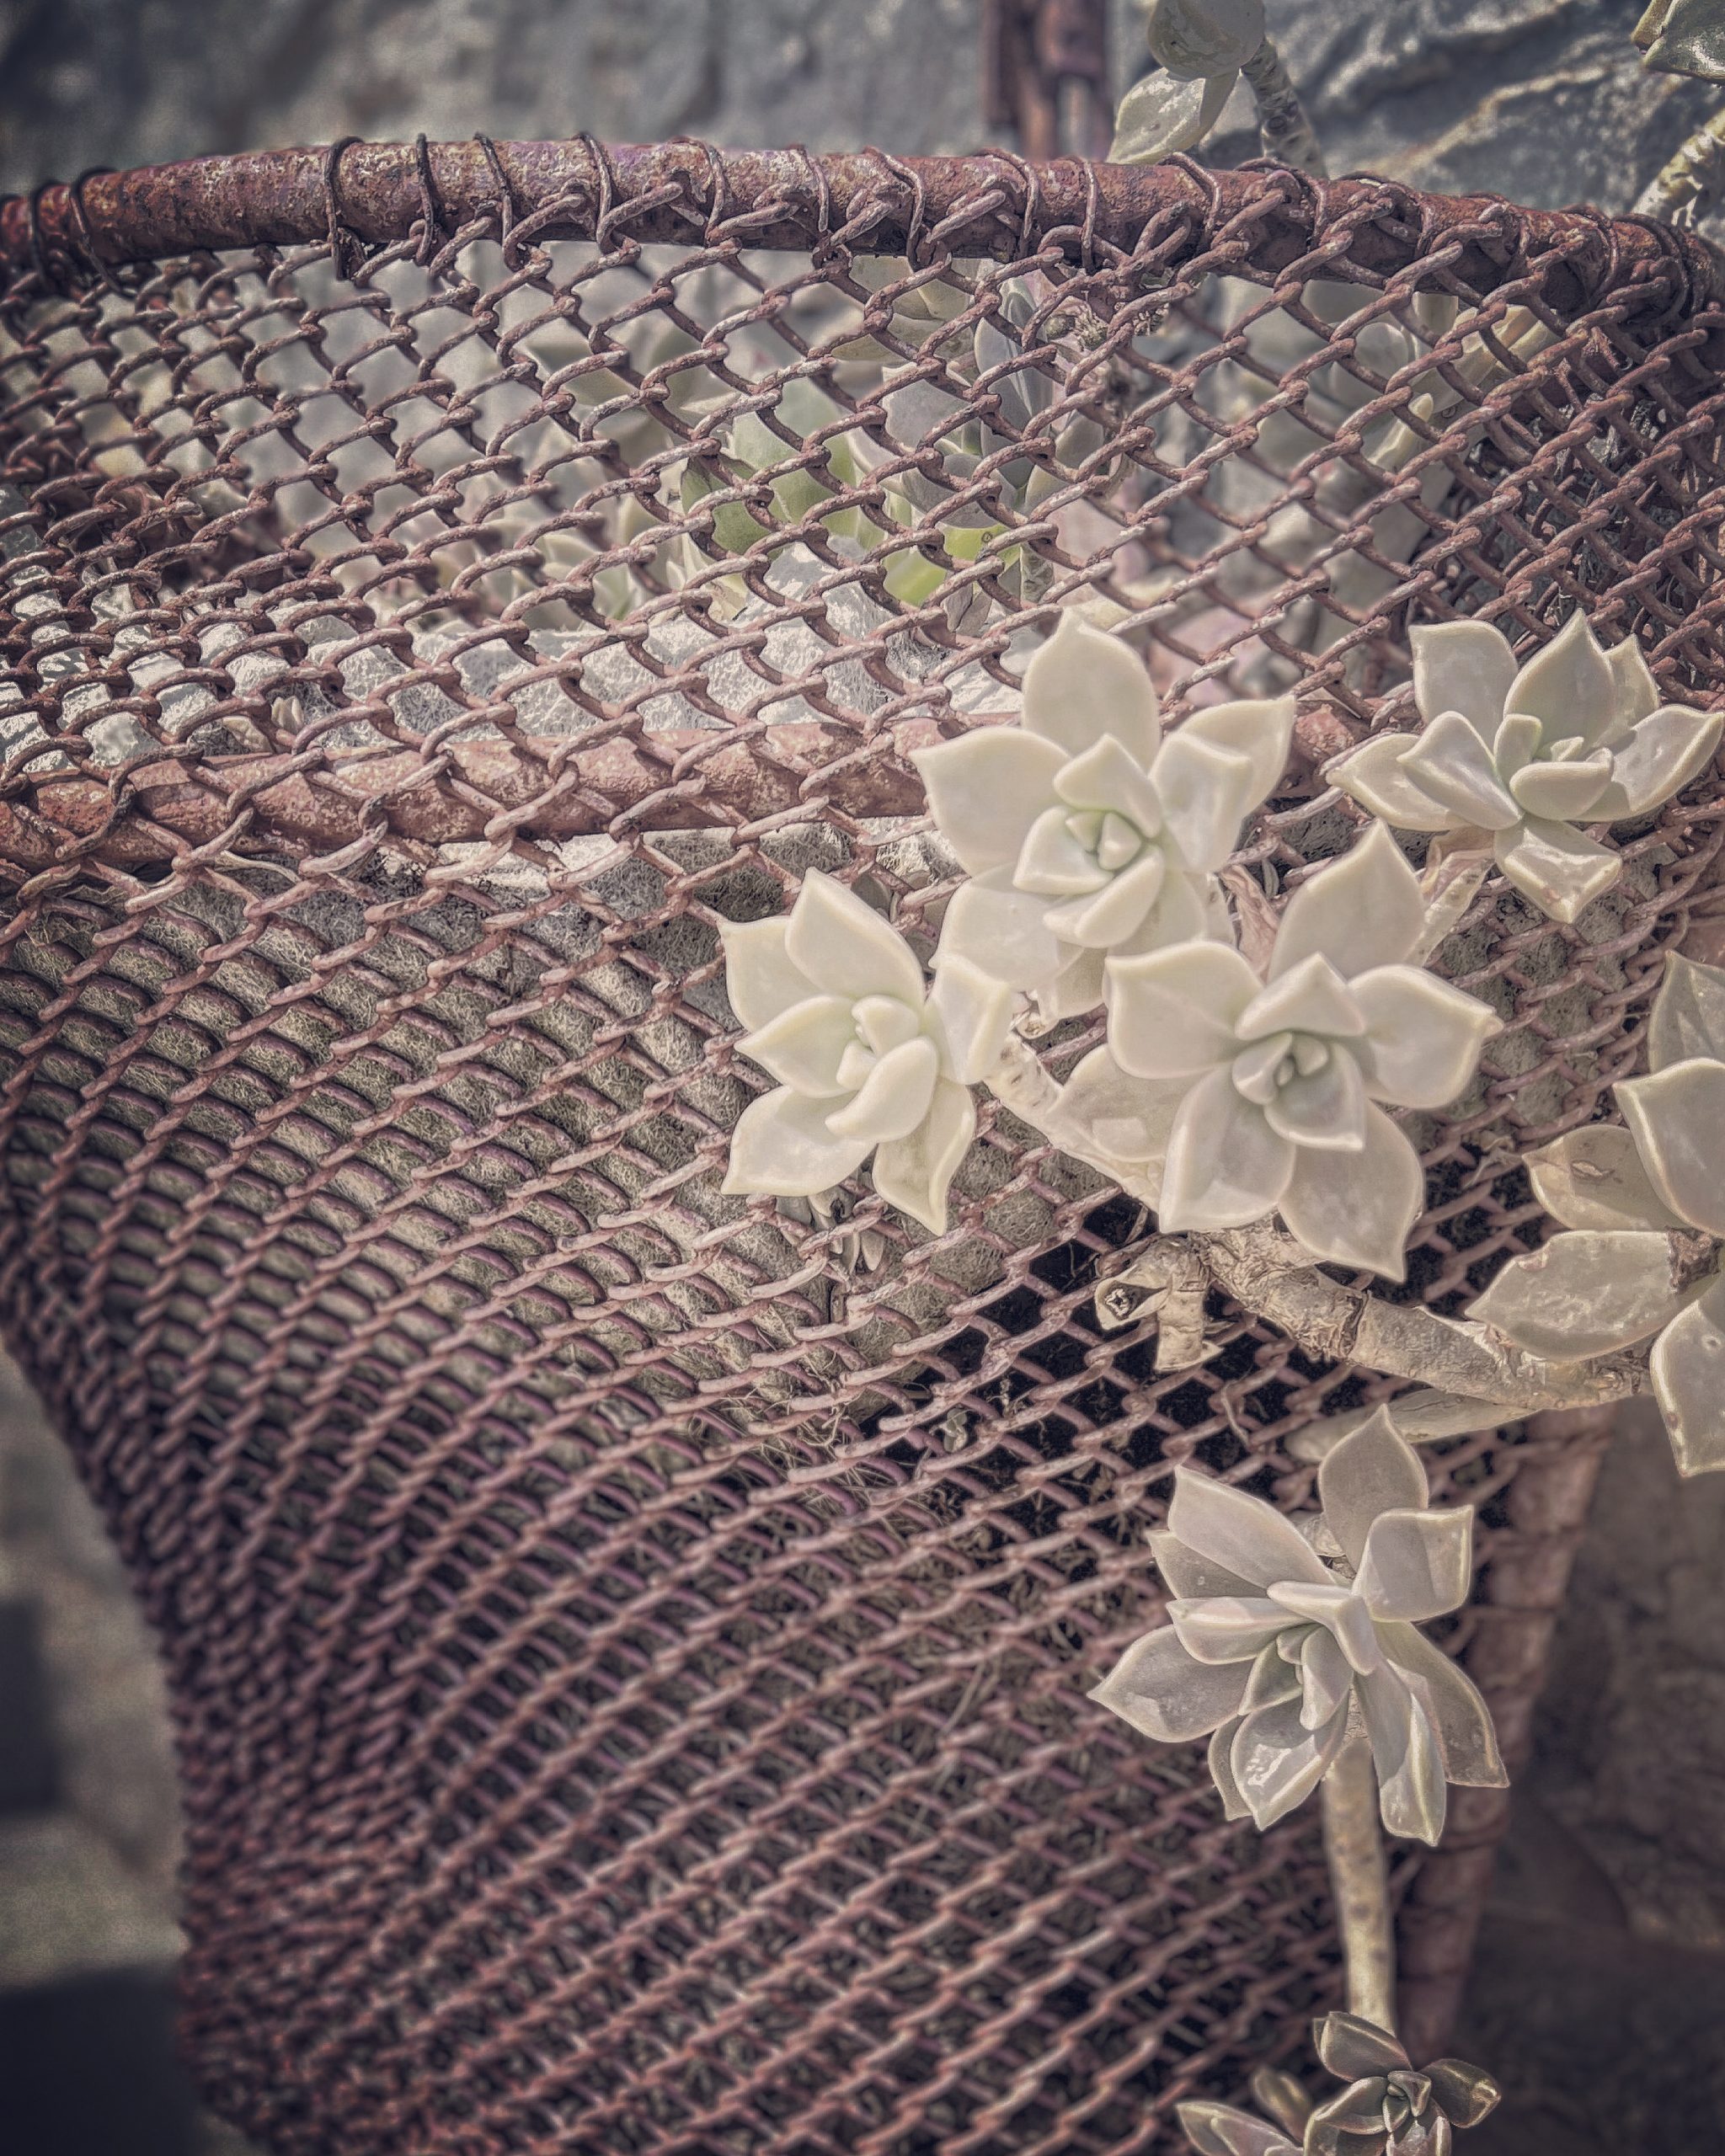 A tiny splash of colour - silvery grey - with the succulents, which are now tumbling out of this beautiful vintage, wrought iron basket.